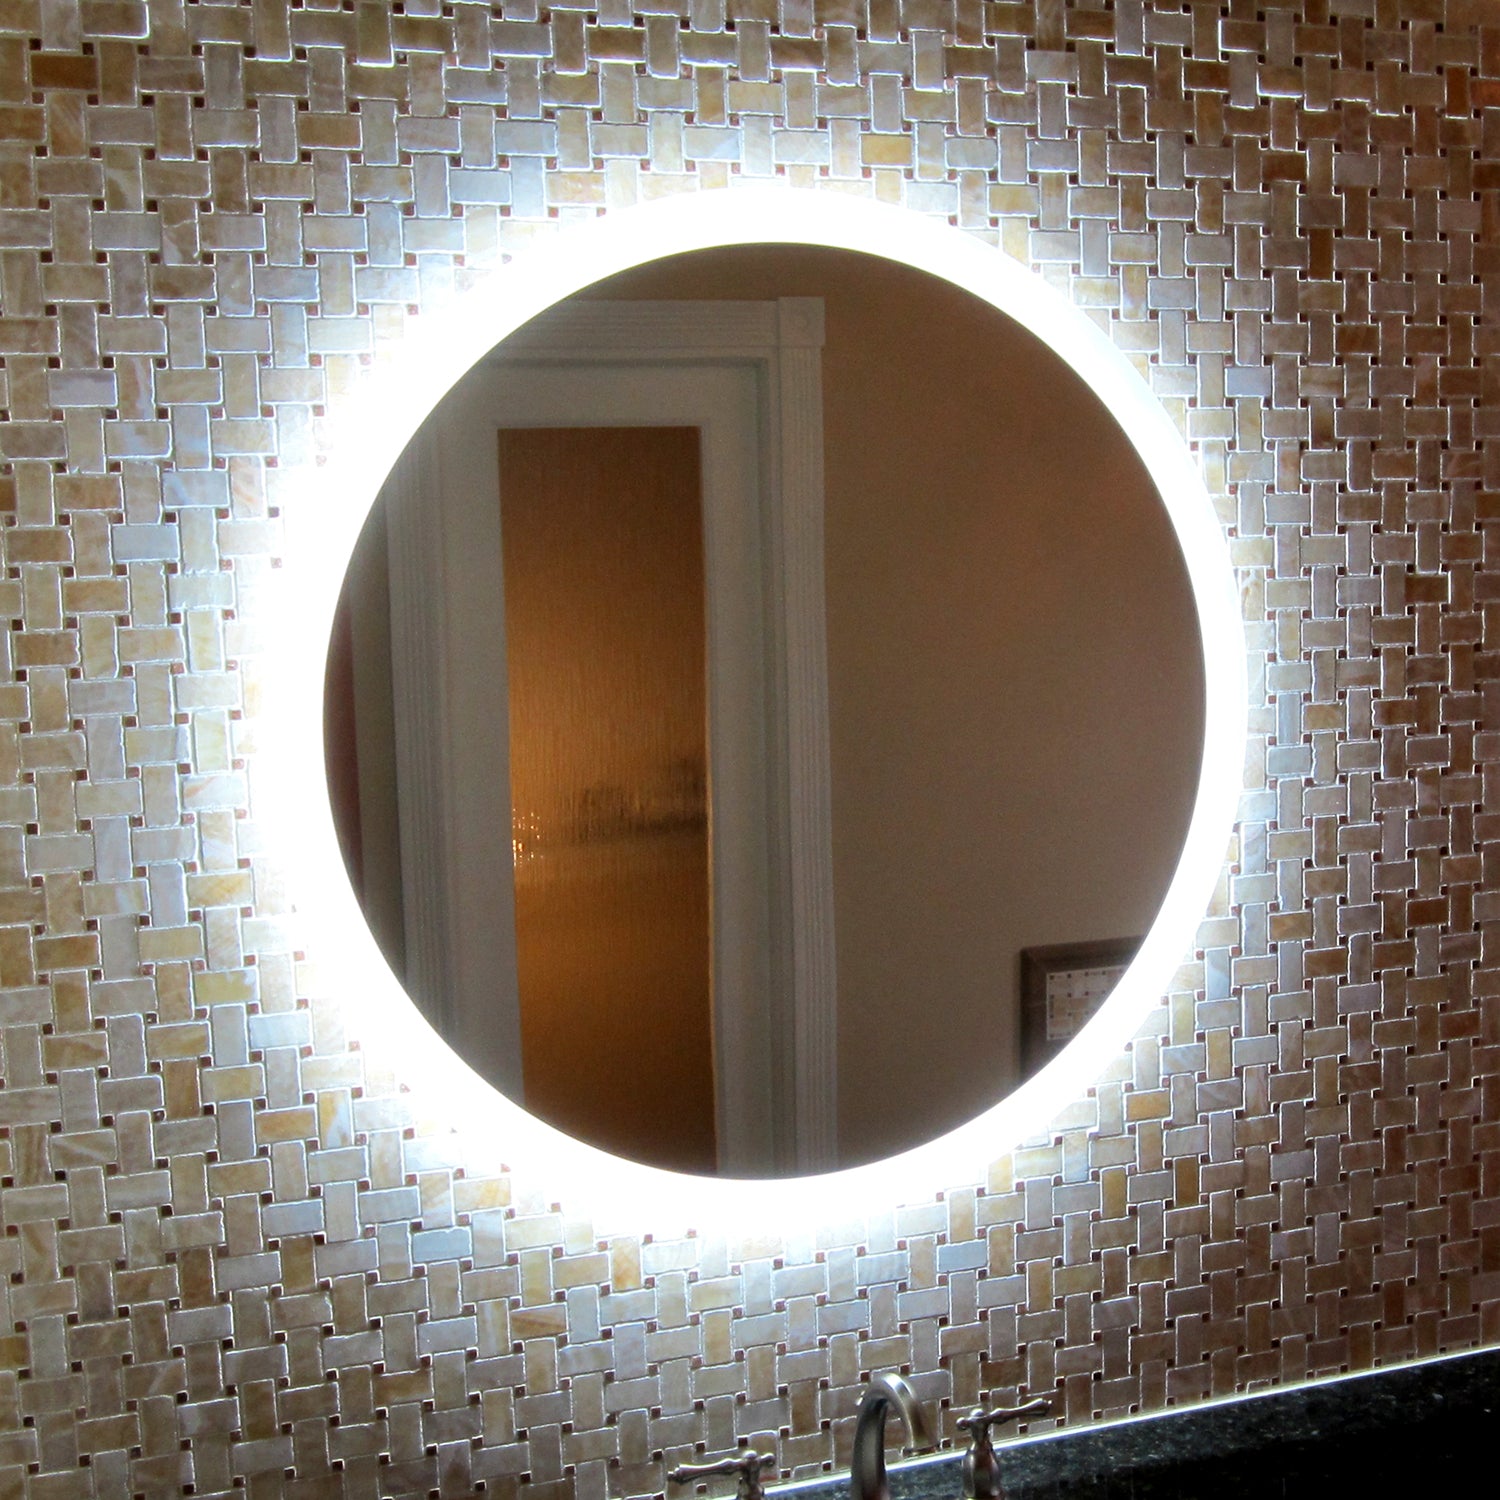 LED Mirror (Side-Lighted Round) 48" x 48"